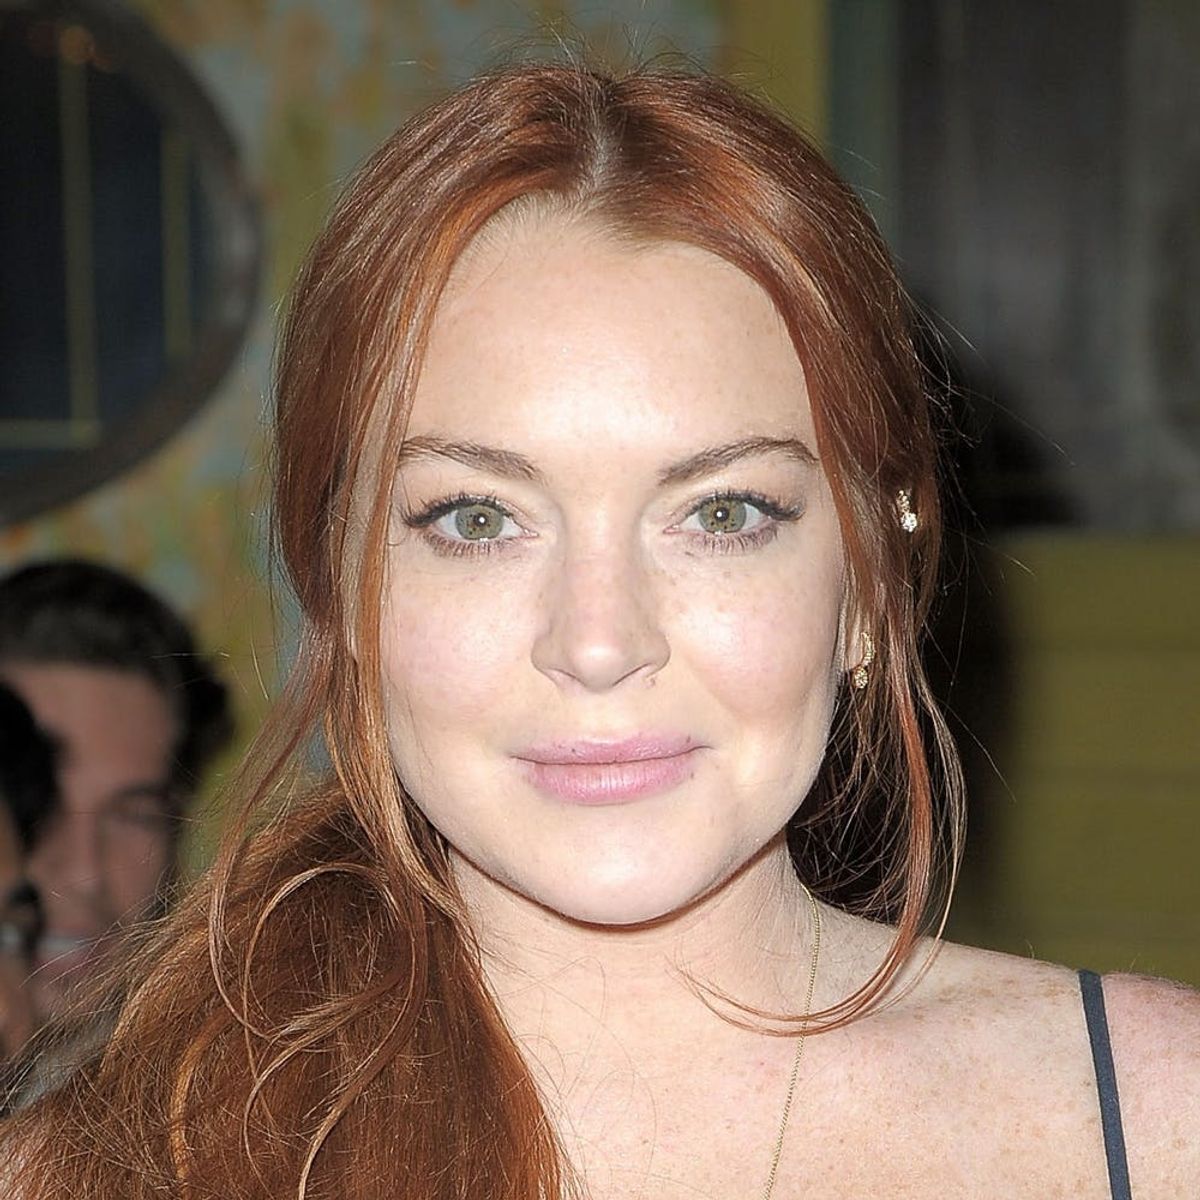 Lindsay Lohan Is Making Her Comeback With a Grace Kelly-Like Transformation